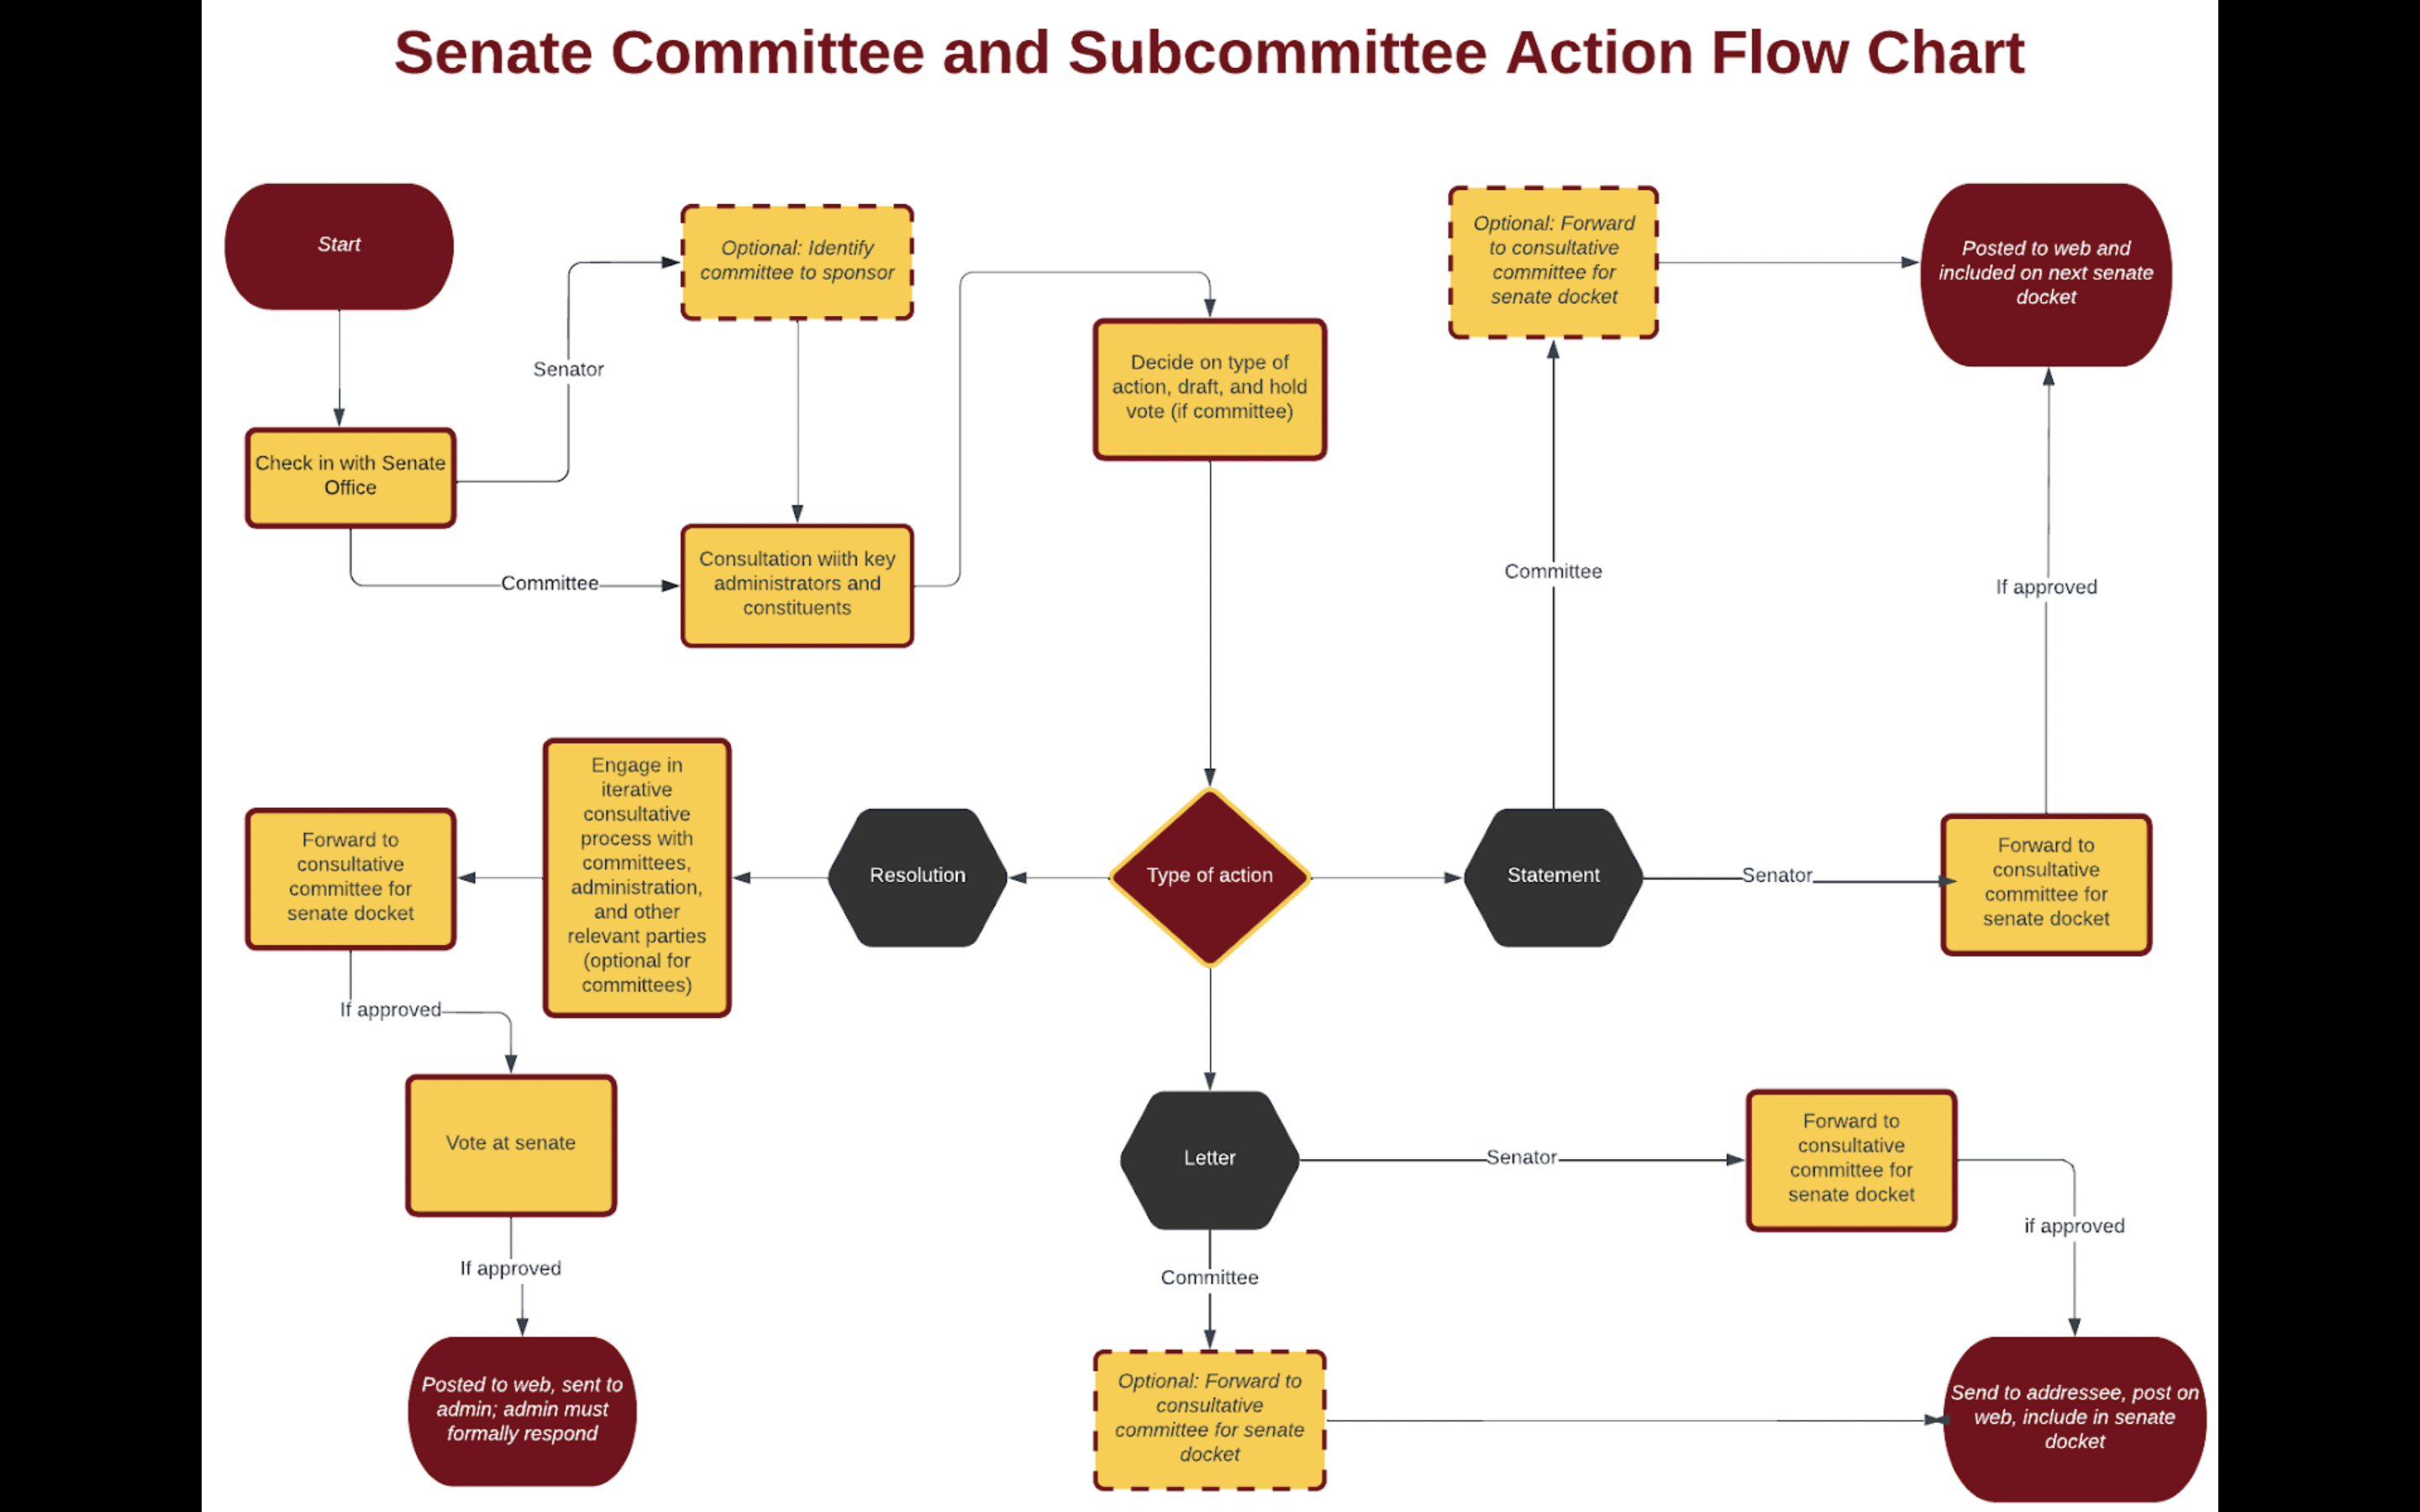 Flow chart showing the process of bringing a statement, letter, or resolution through the governance system